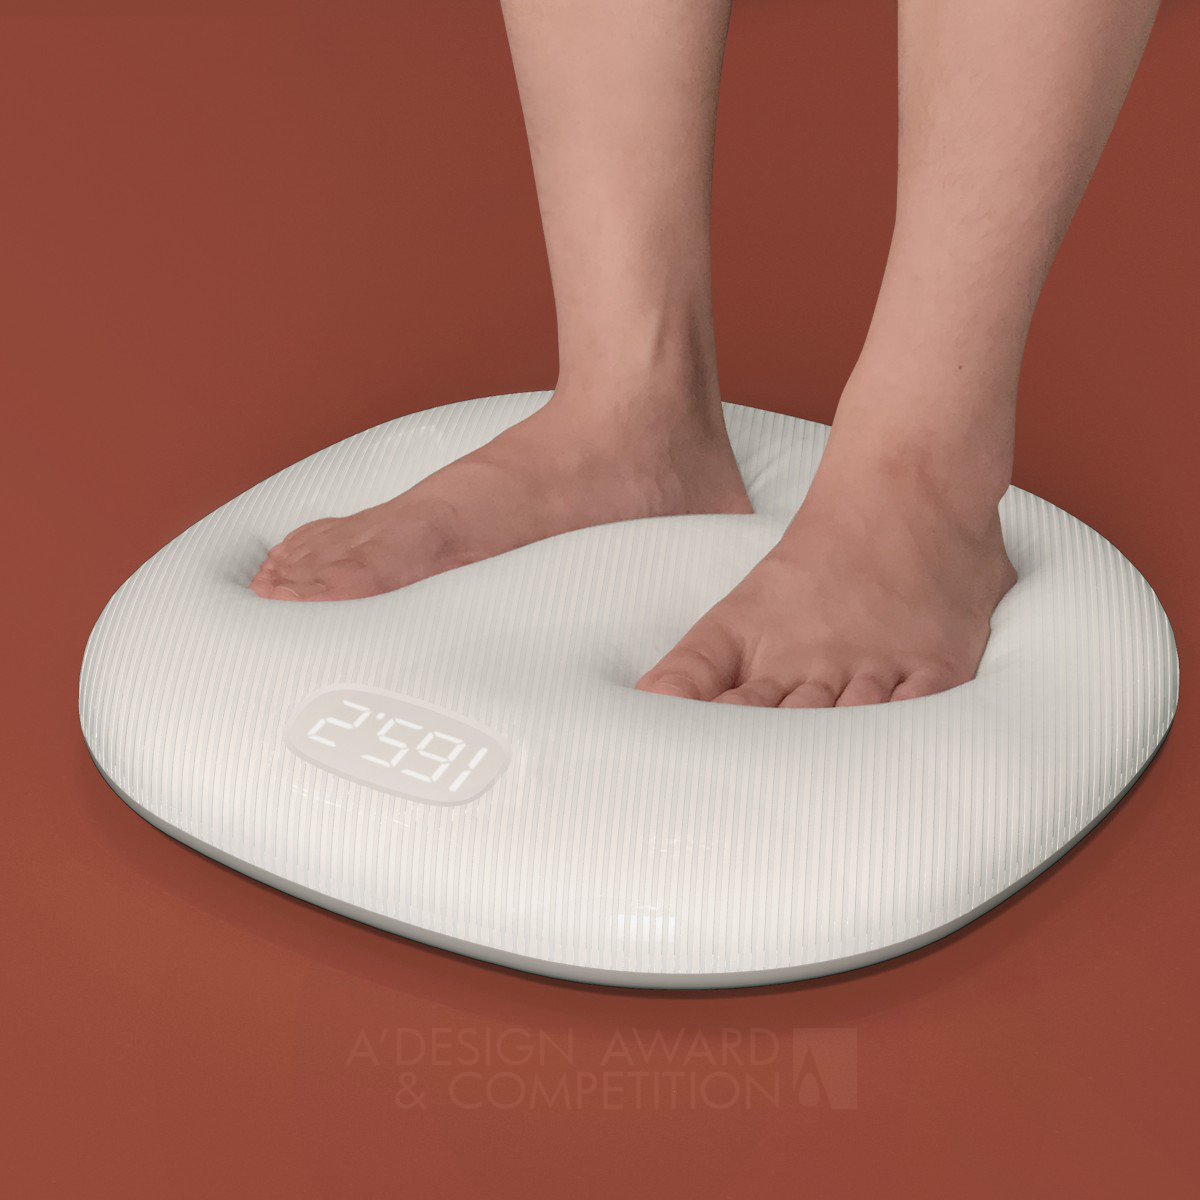 Qiuyu Wang wins Silver at the prestigious A' Home Appliances Design Award with Elastic Change Weight Scale.